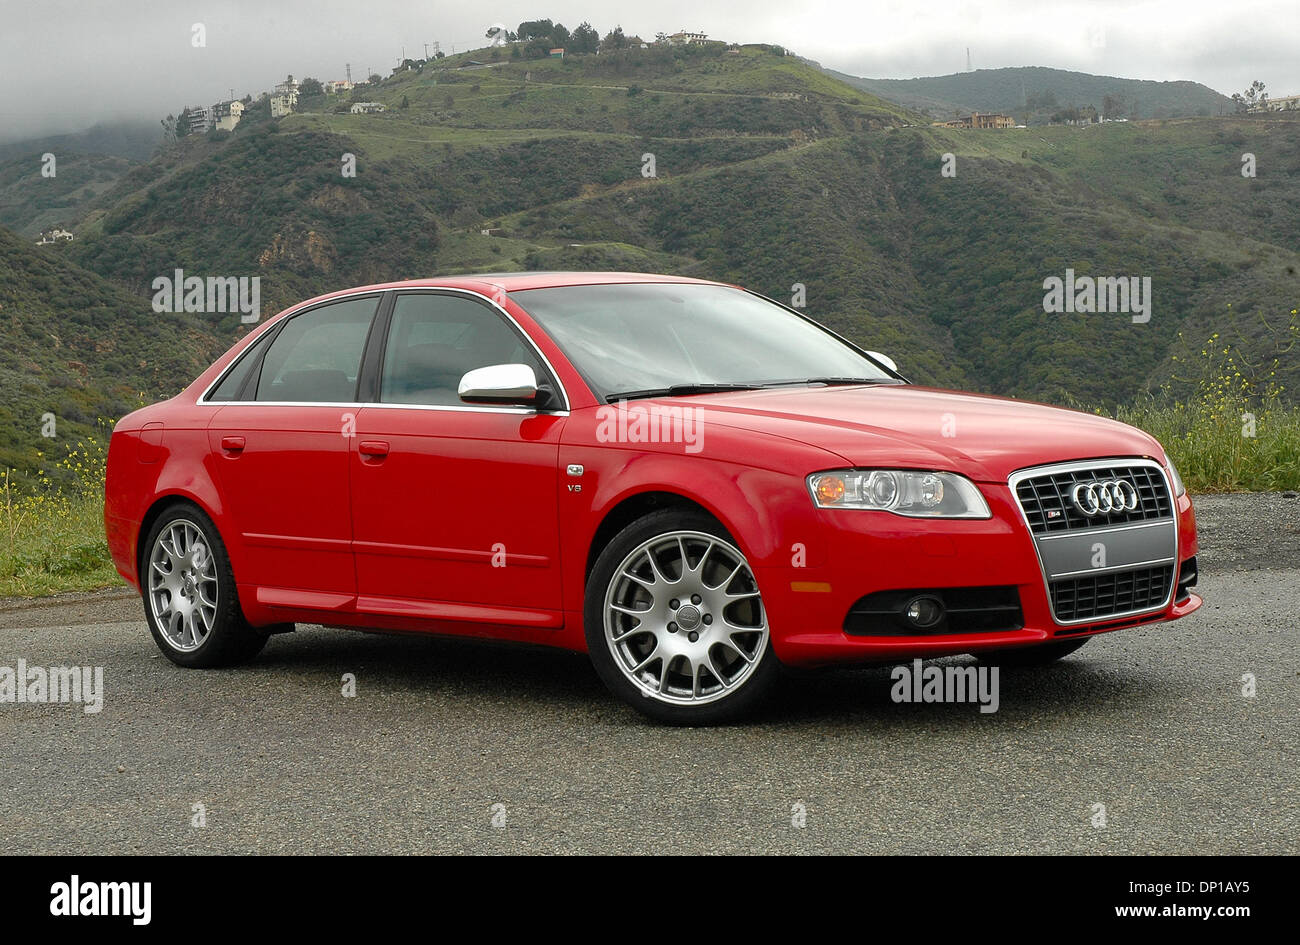 Apr 27, 2006; Los Angeles, CA, USA; 2006 Audi S4 sport sedan. Starting with  the Audi A4 chassis and body, Audi added the 340hp 4.2 liter, all-aluminum,  DOHC V8 engine. This award-winning